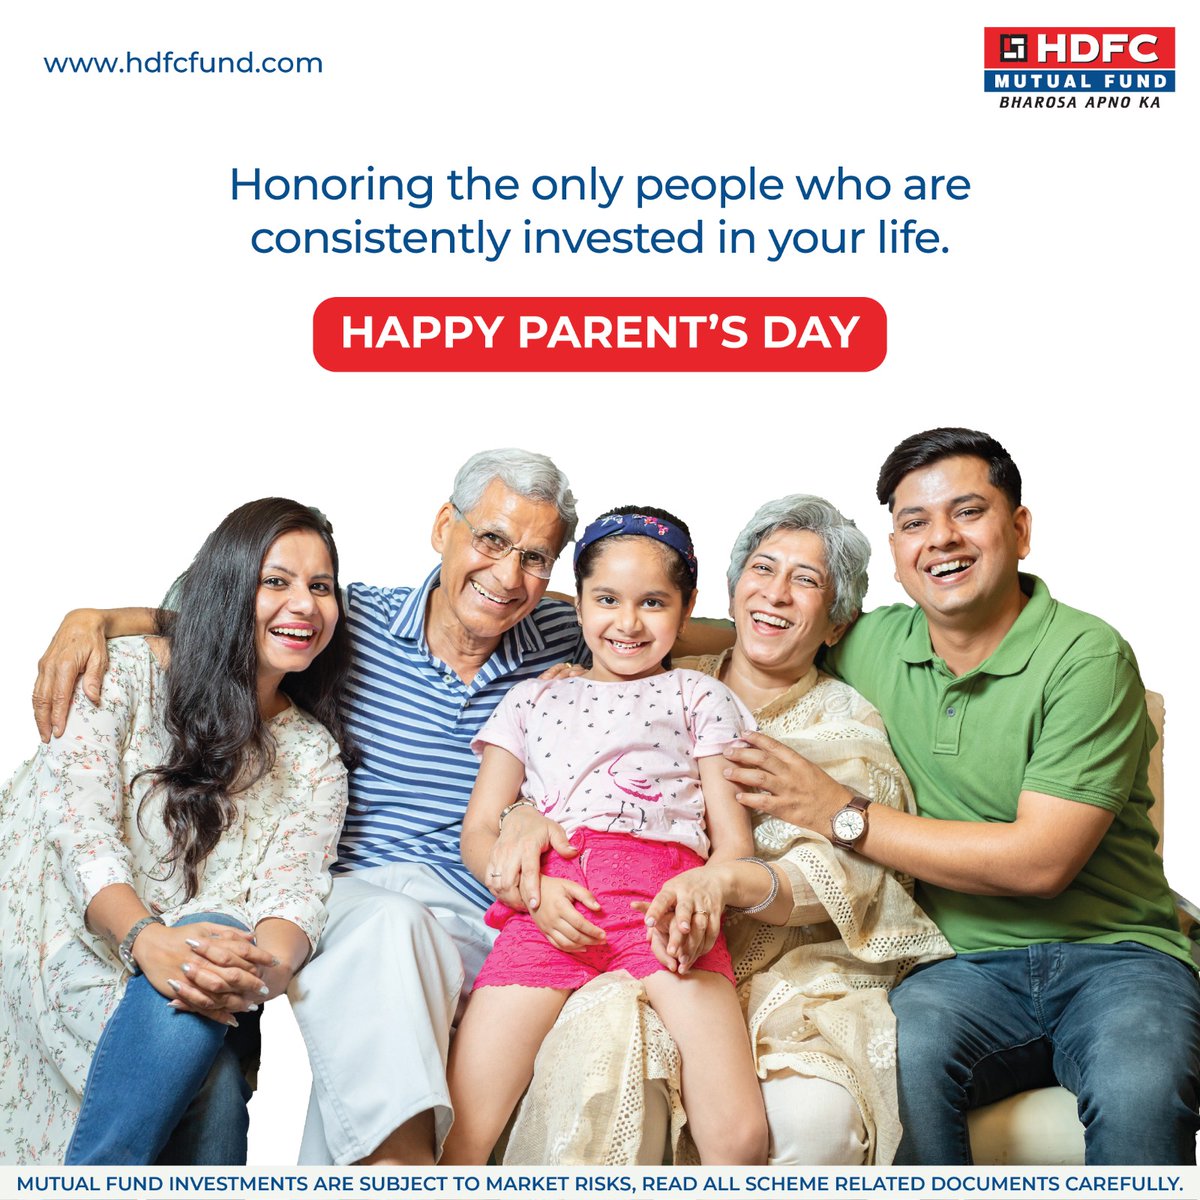 Celebrating the incredible investment our parents make in us by nurturing dreams, providing wisdom and planting the seeds for a prosperous future.

#parentsday #hdfcmf